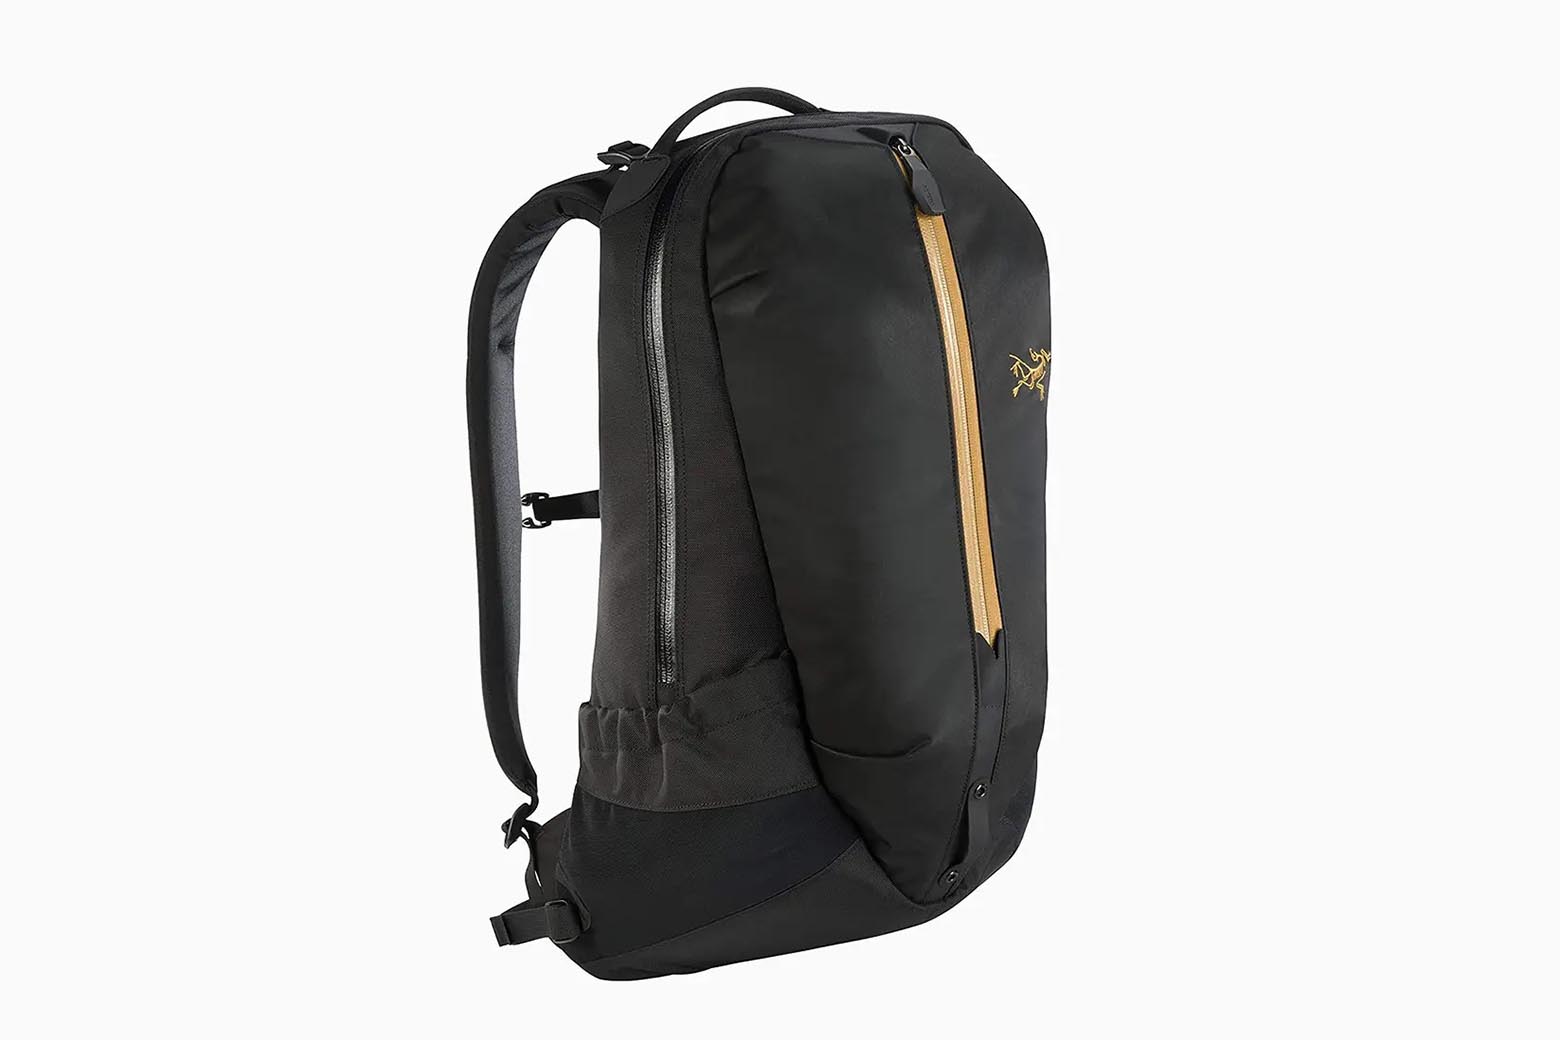 23 Best EDC Backpacks: Top Everyday Carry Bags For Men